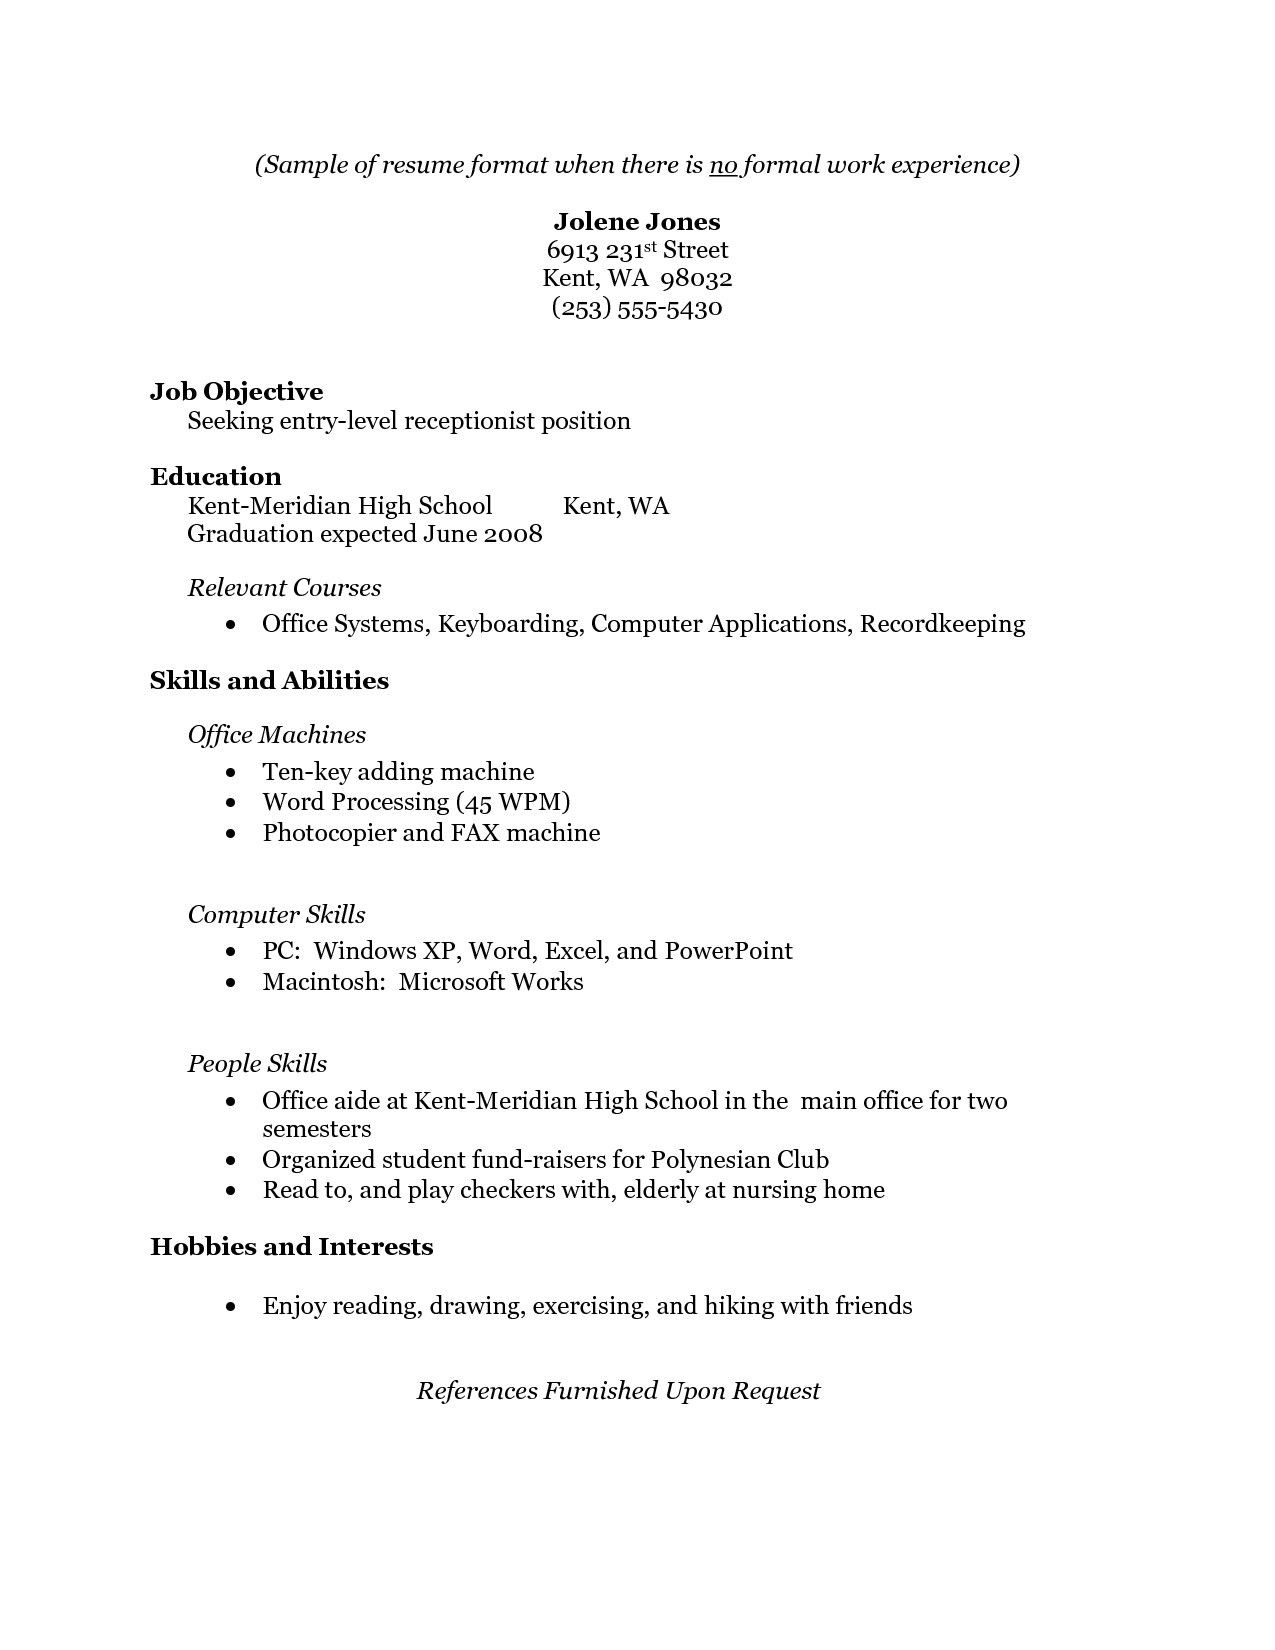 Resume Templates for Students with No Job Experience Free Resume Templates No Work Experience #experience …